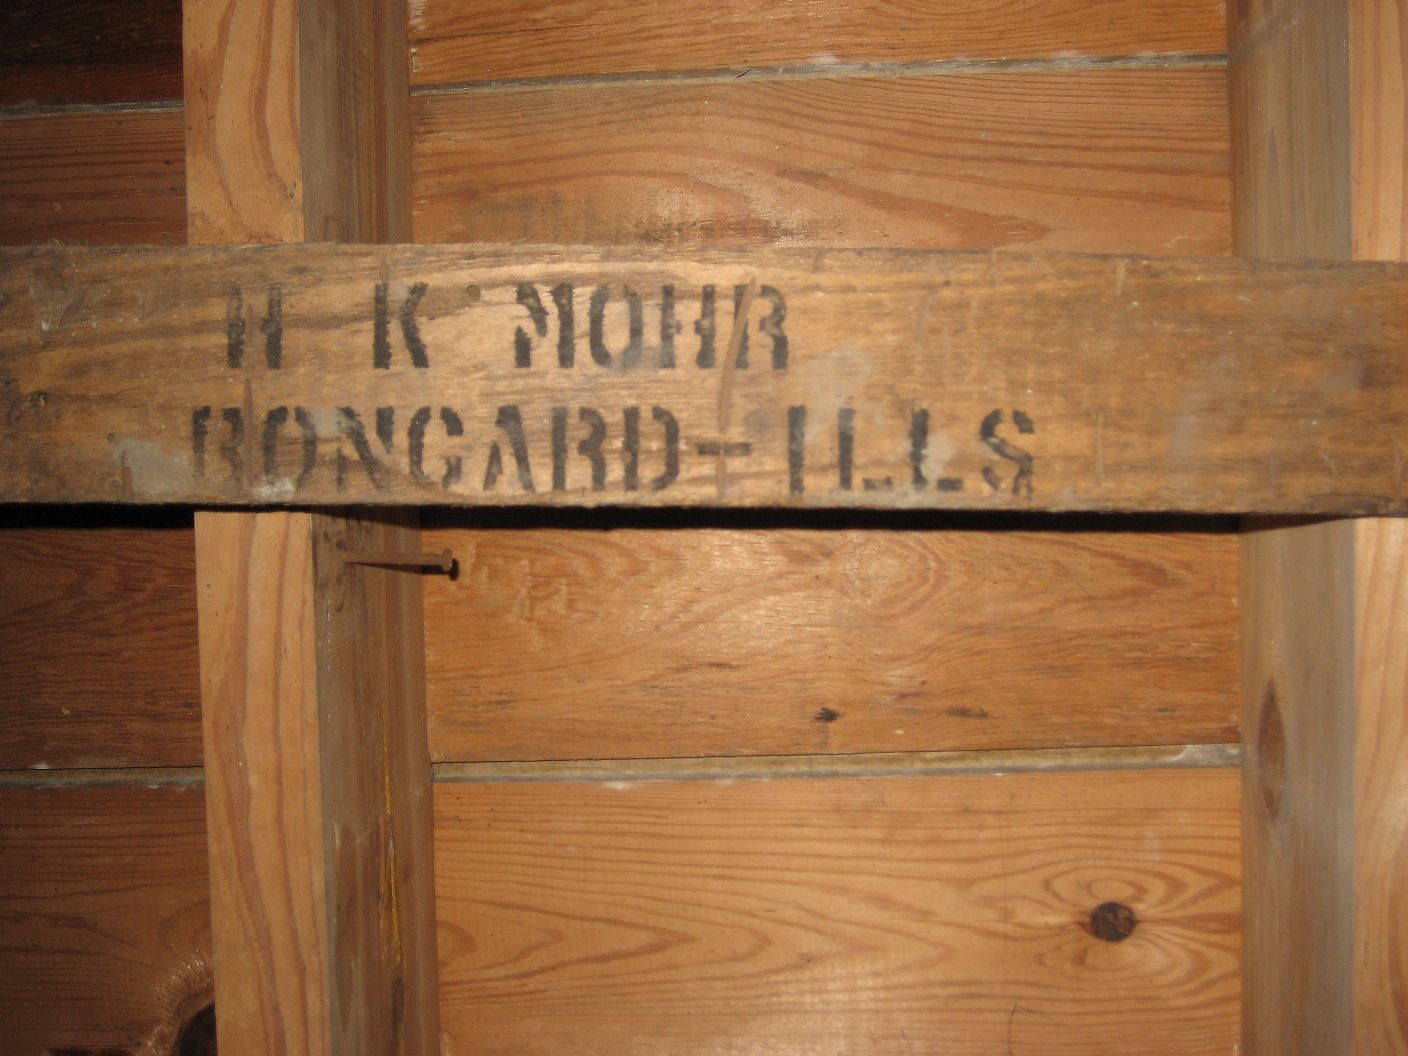 These houses were shipped in wooden crates, marked with the owners name and destination (train station). The shipping crates were often salvaged and the wood was reused to build coal bins or basement shelving. Heres one such remnant found in the basement of the Osborn. 